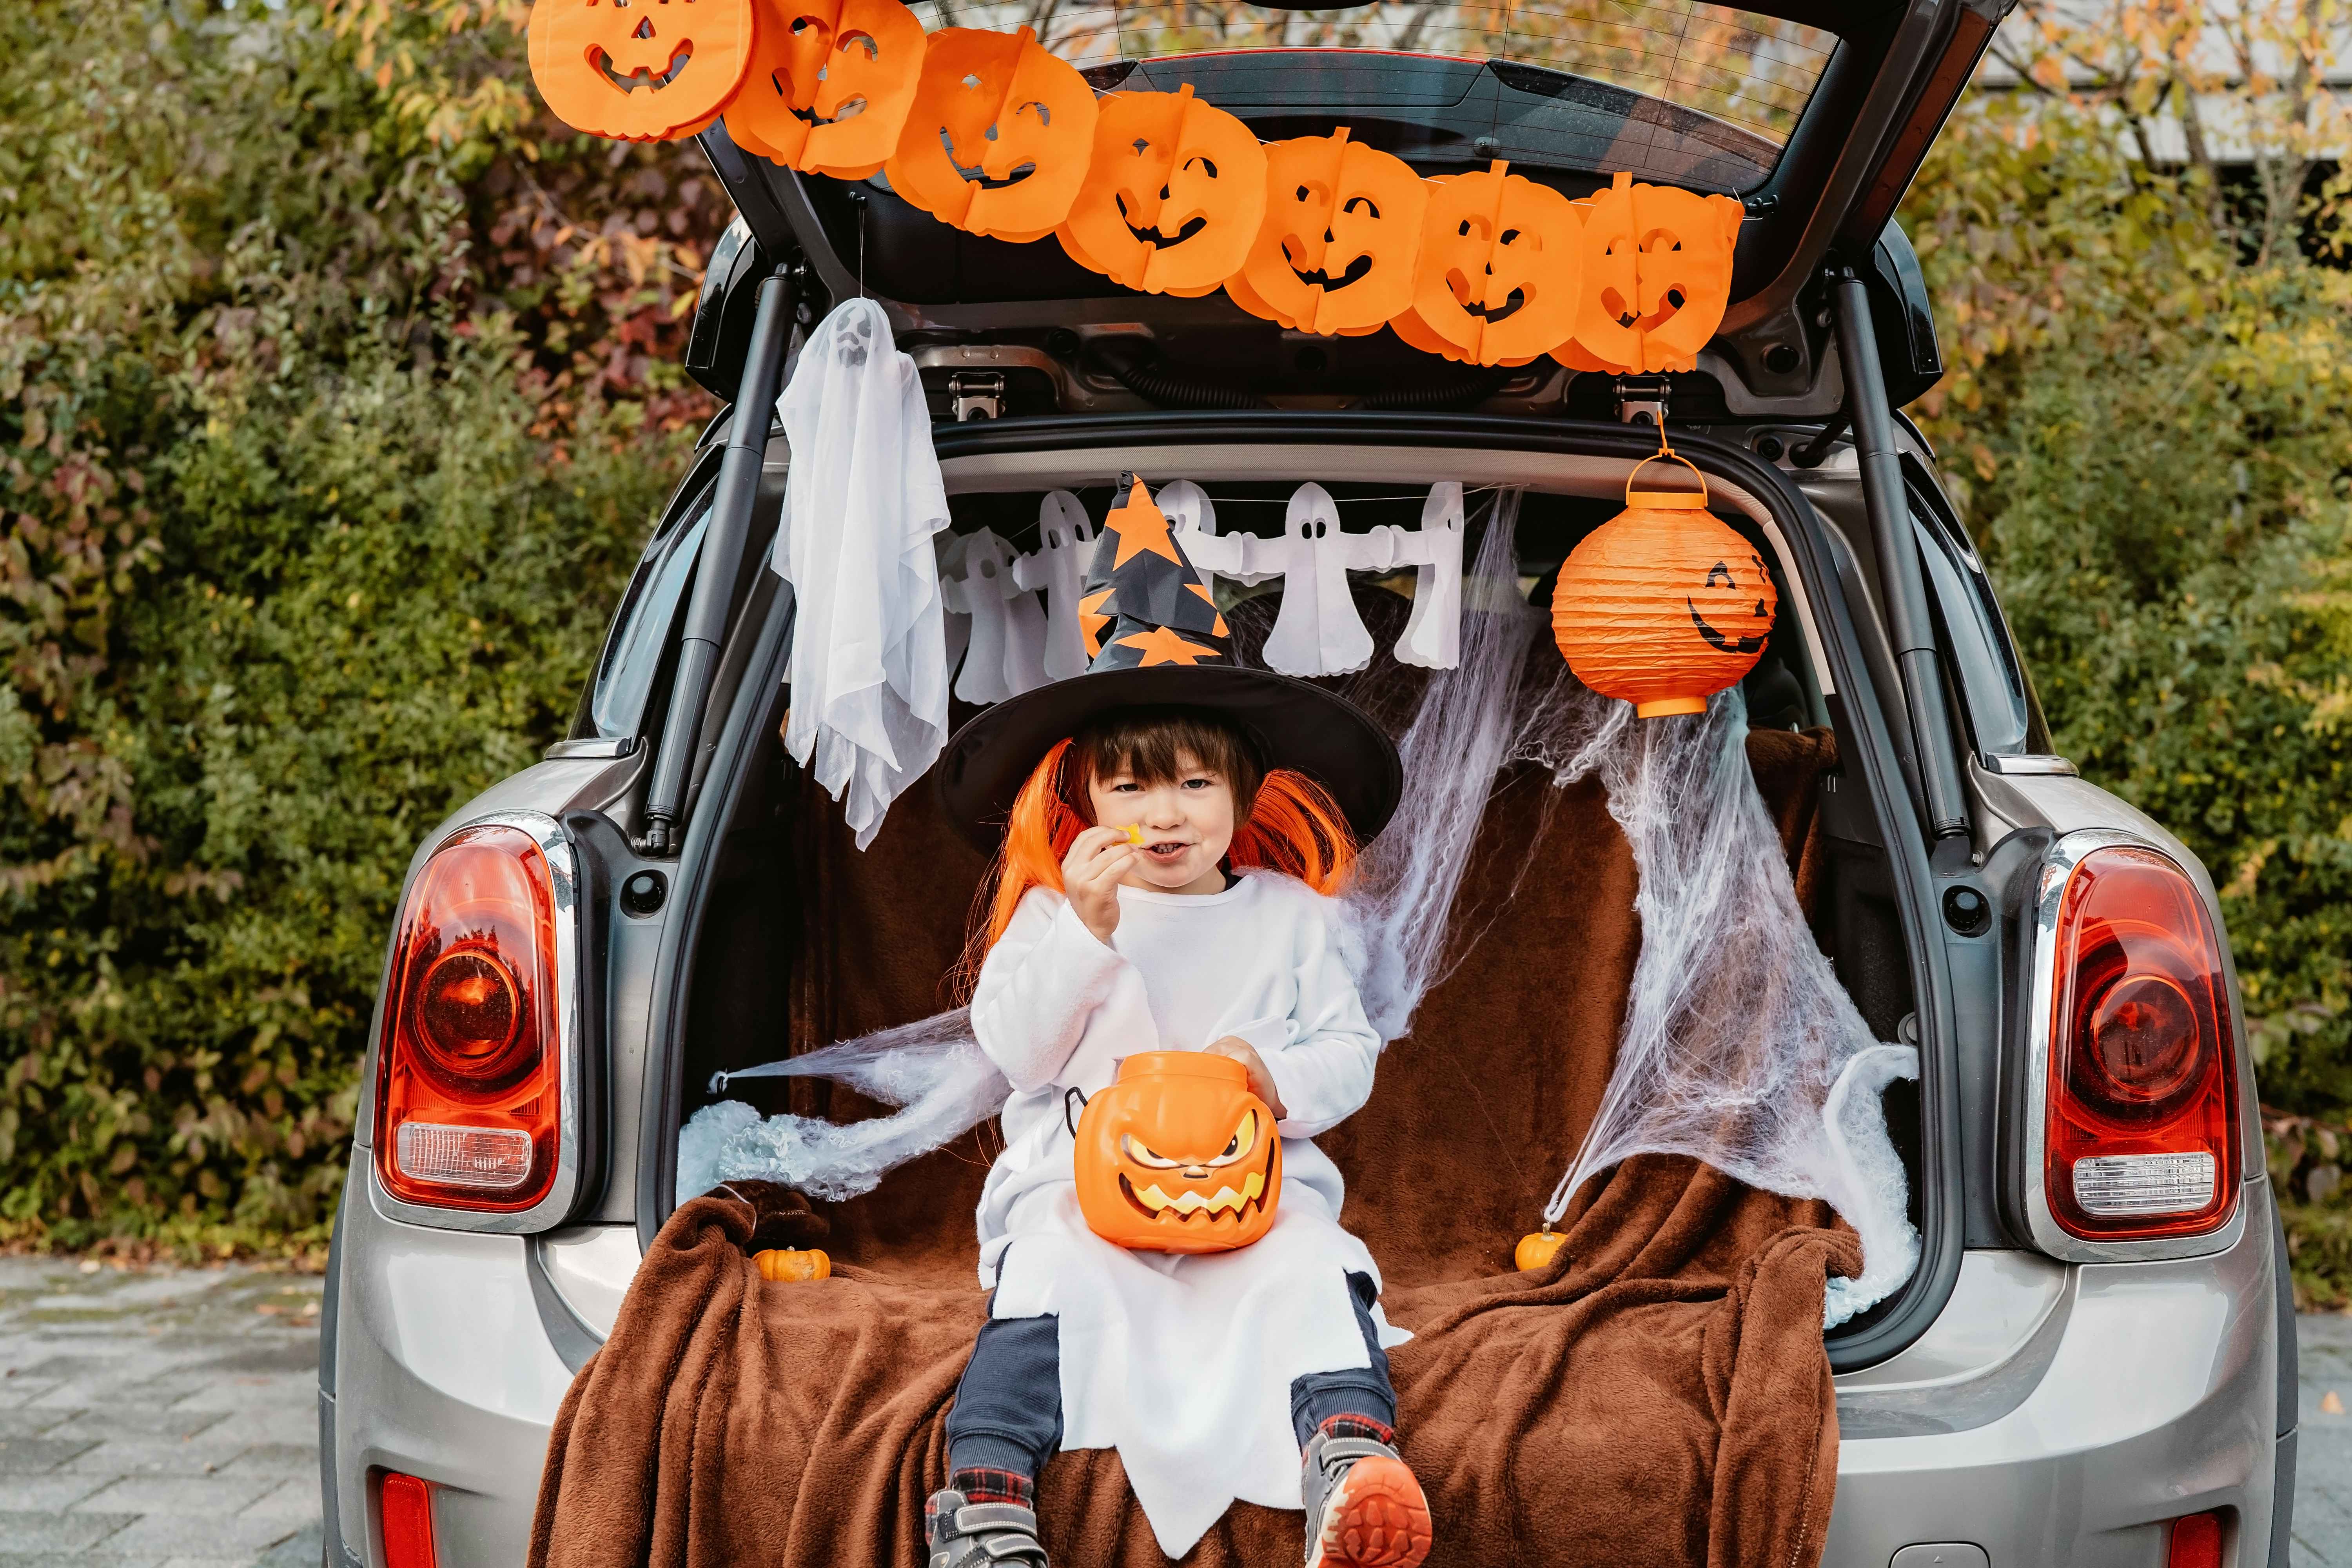 A child dressed in a halloween costume, eating a piece of candy is sitting on in the open truck of a car. The car trunk is decorated with pumpkins and ghosts.